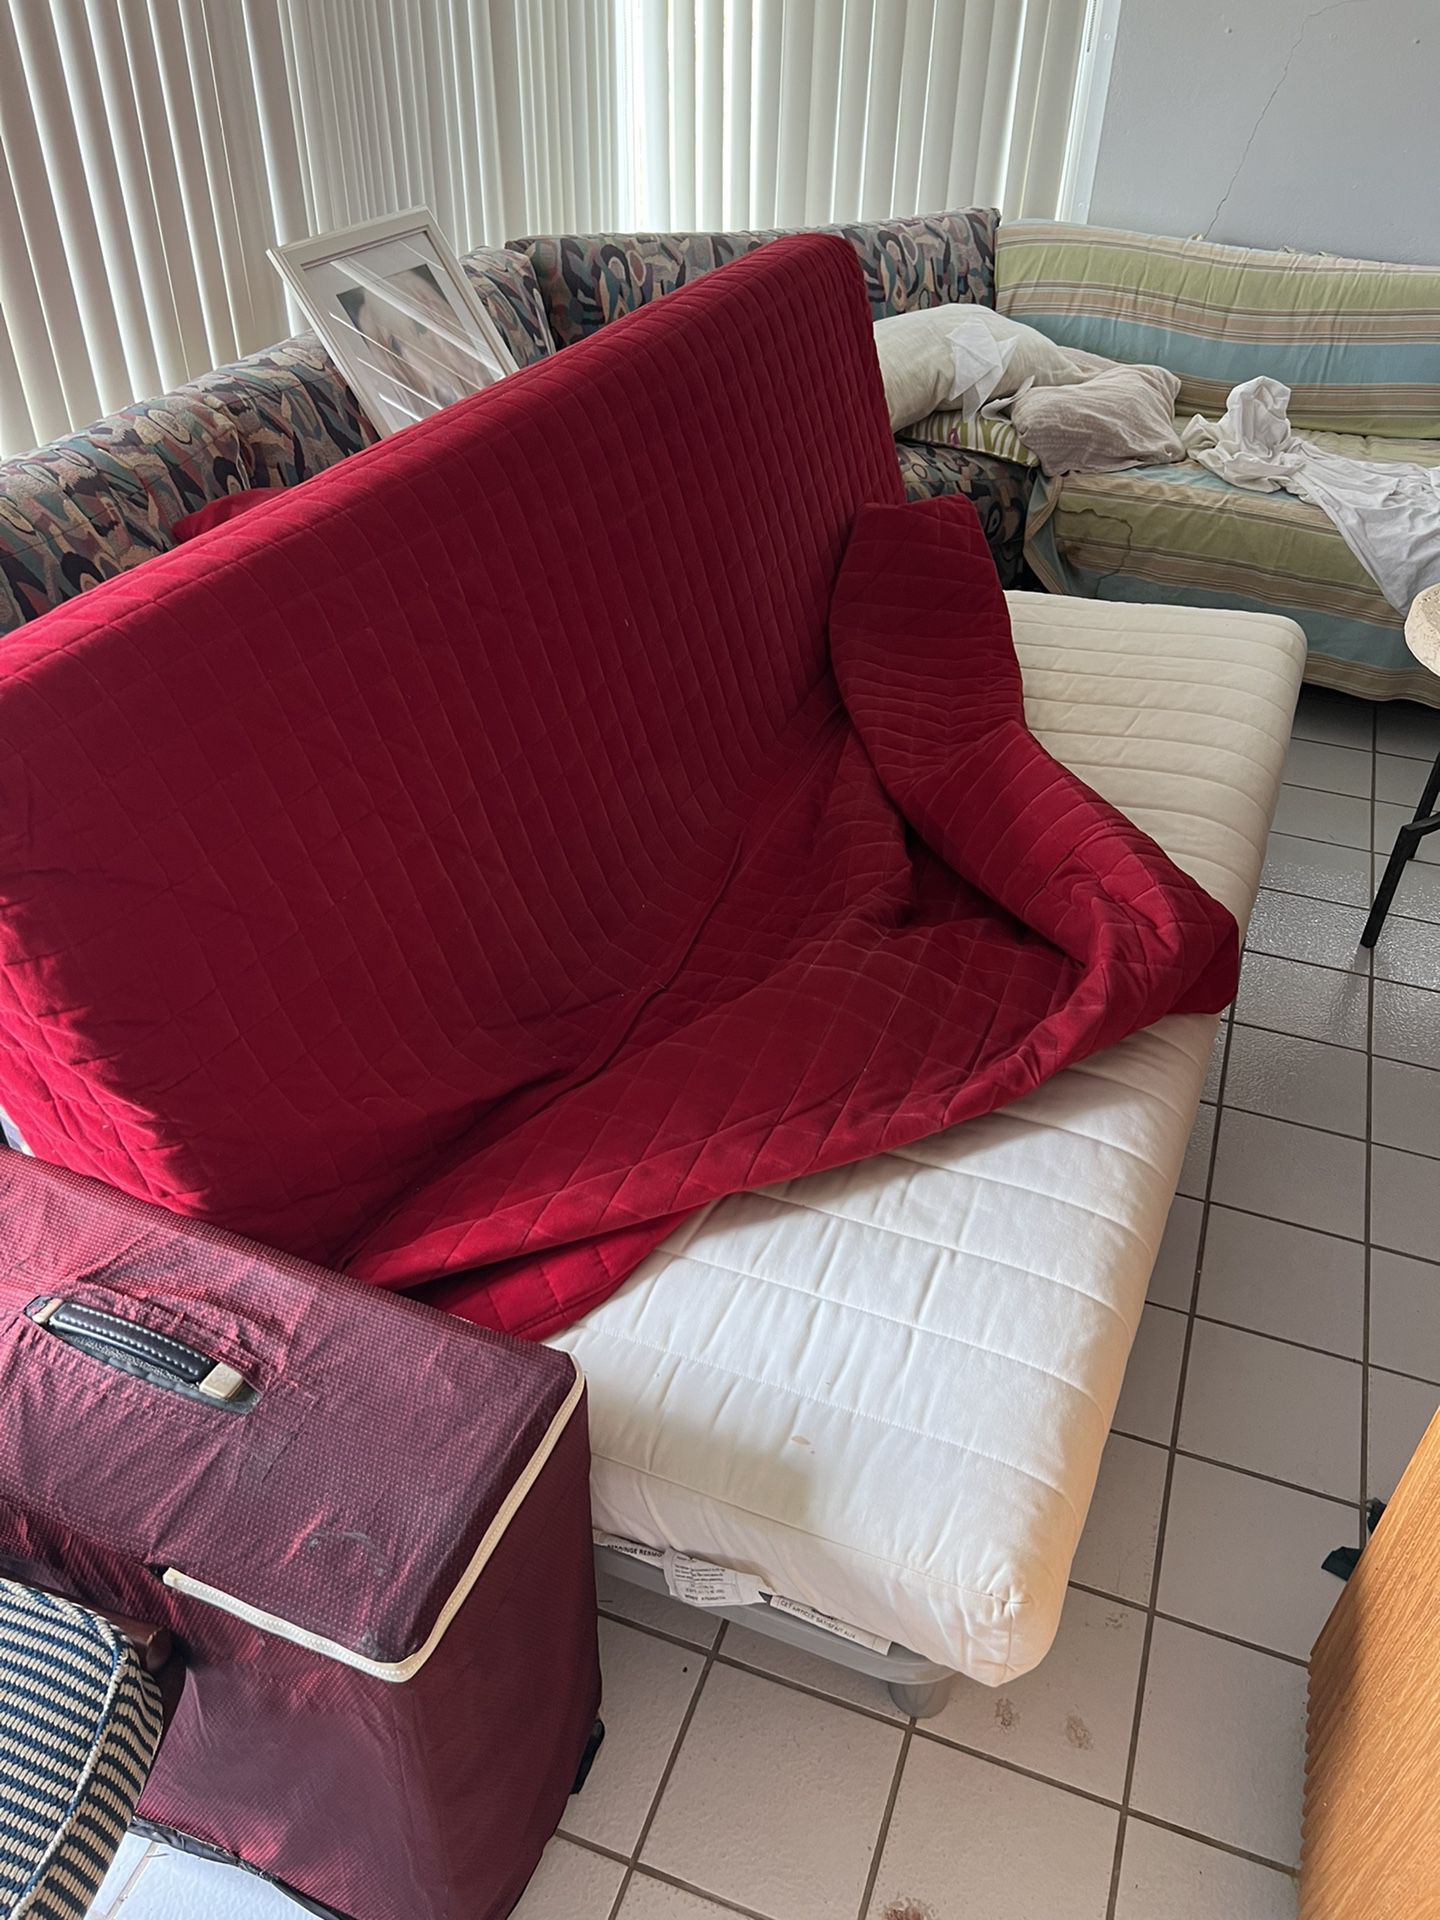 Folding Couch With Cover And Two Pillows